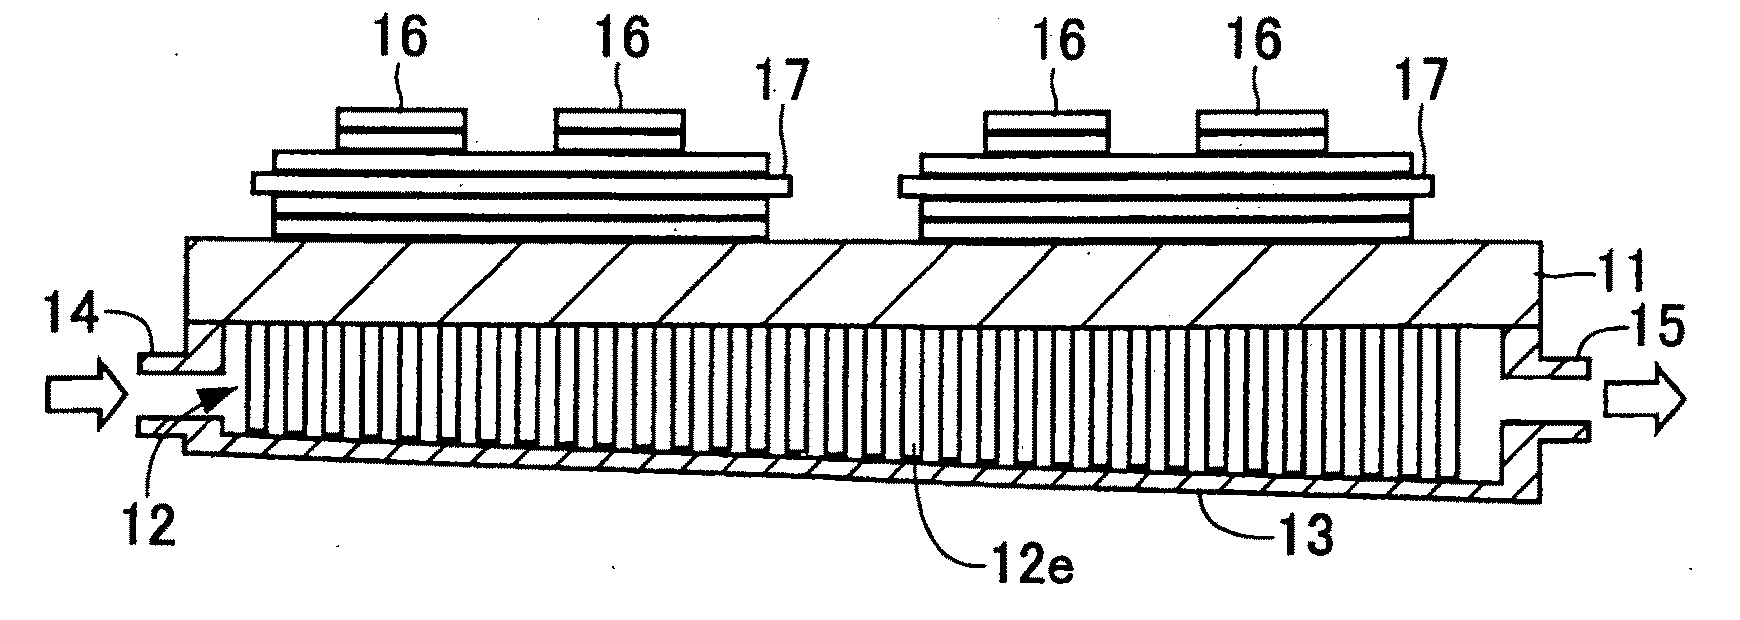 Cooling apparatus for semiconductor chips